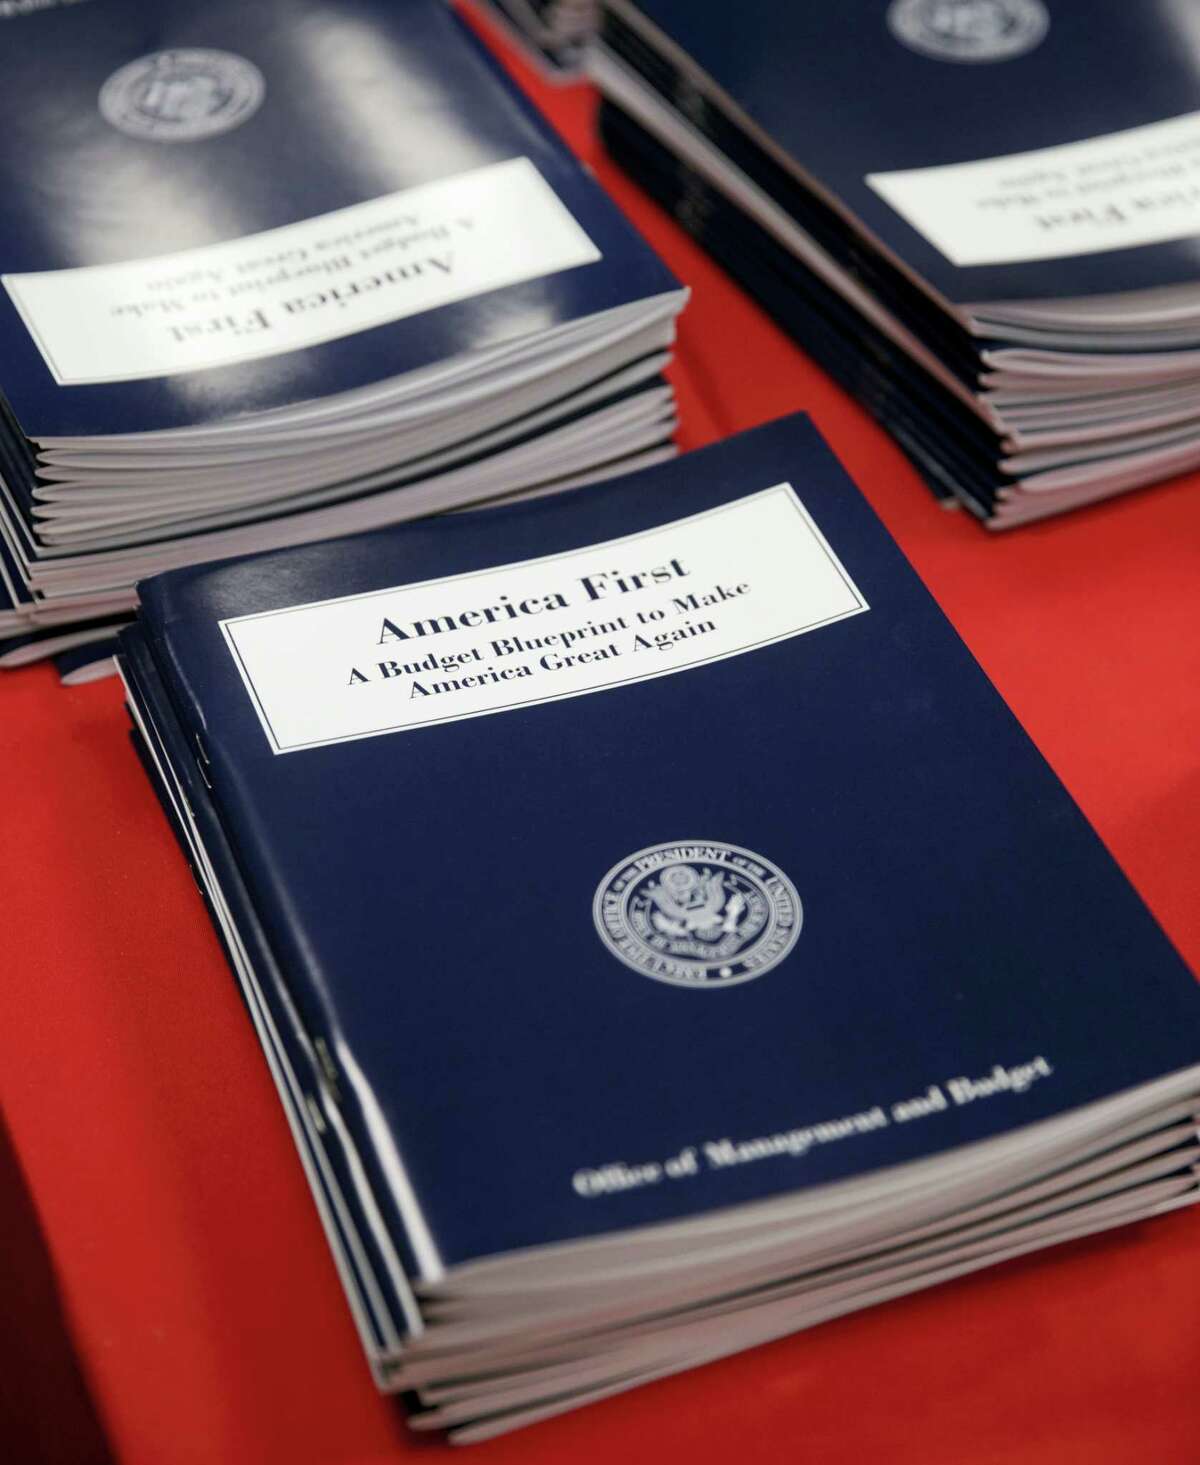 Copies of President Donald Trump’s first budget are displayed at the Government Printing Office in Washington, Thursday, March, 16, 2017. Trump unveiled a $1.15 trillion budget on Thursday, a far-reaching overhaul of federal government spending that slashes many domestic programs to finance a significant increase in the military and make a down payment on a U.S.-Mexico border wall.